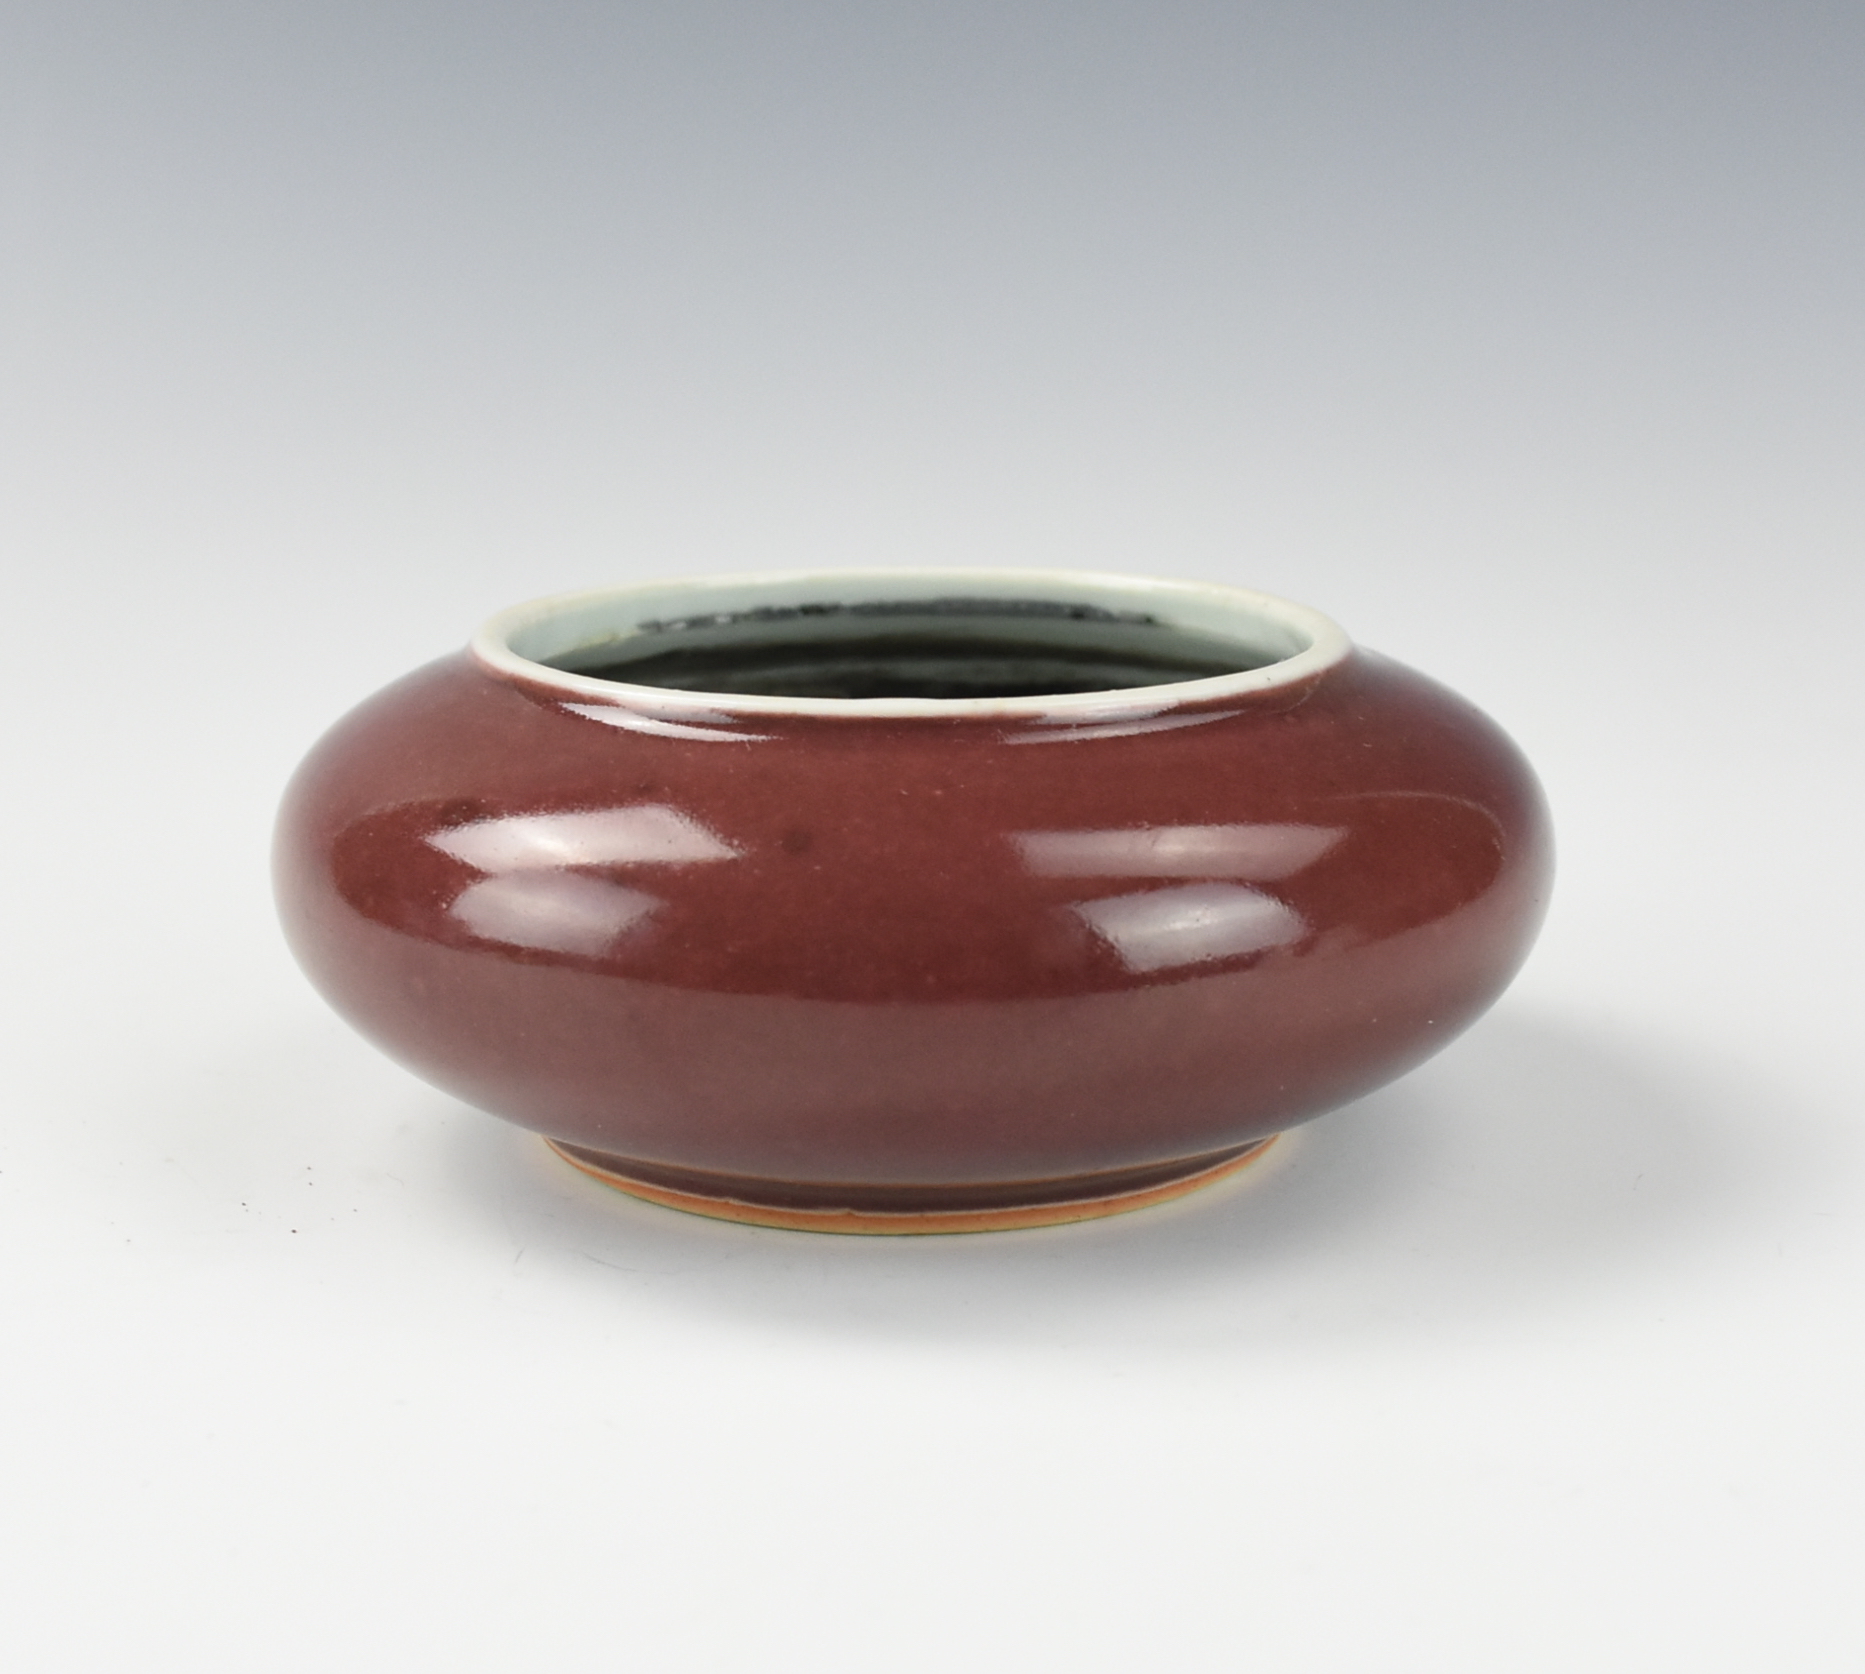 CHINESE RED GLAZED WATER POT A 2ced1b